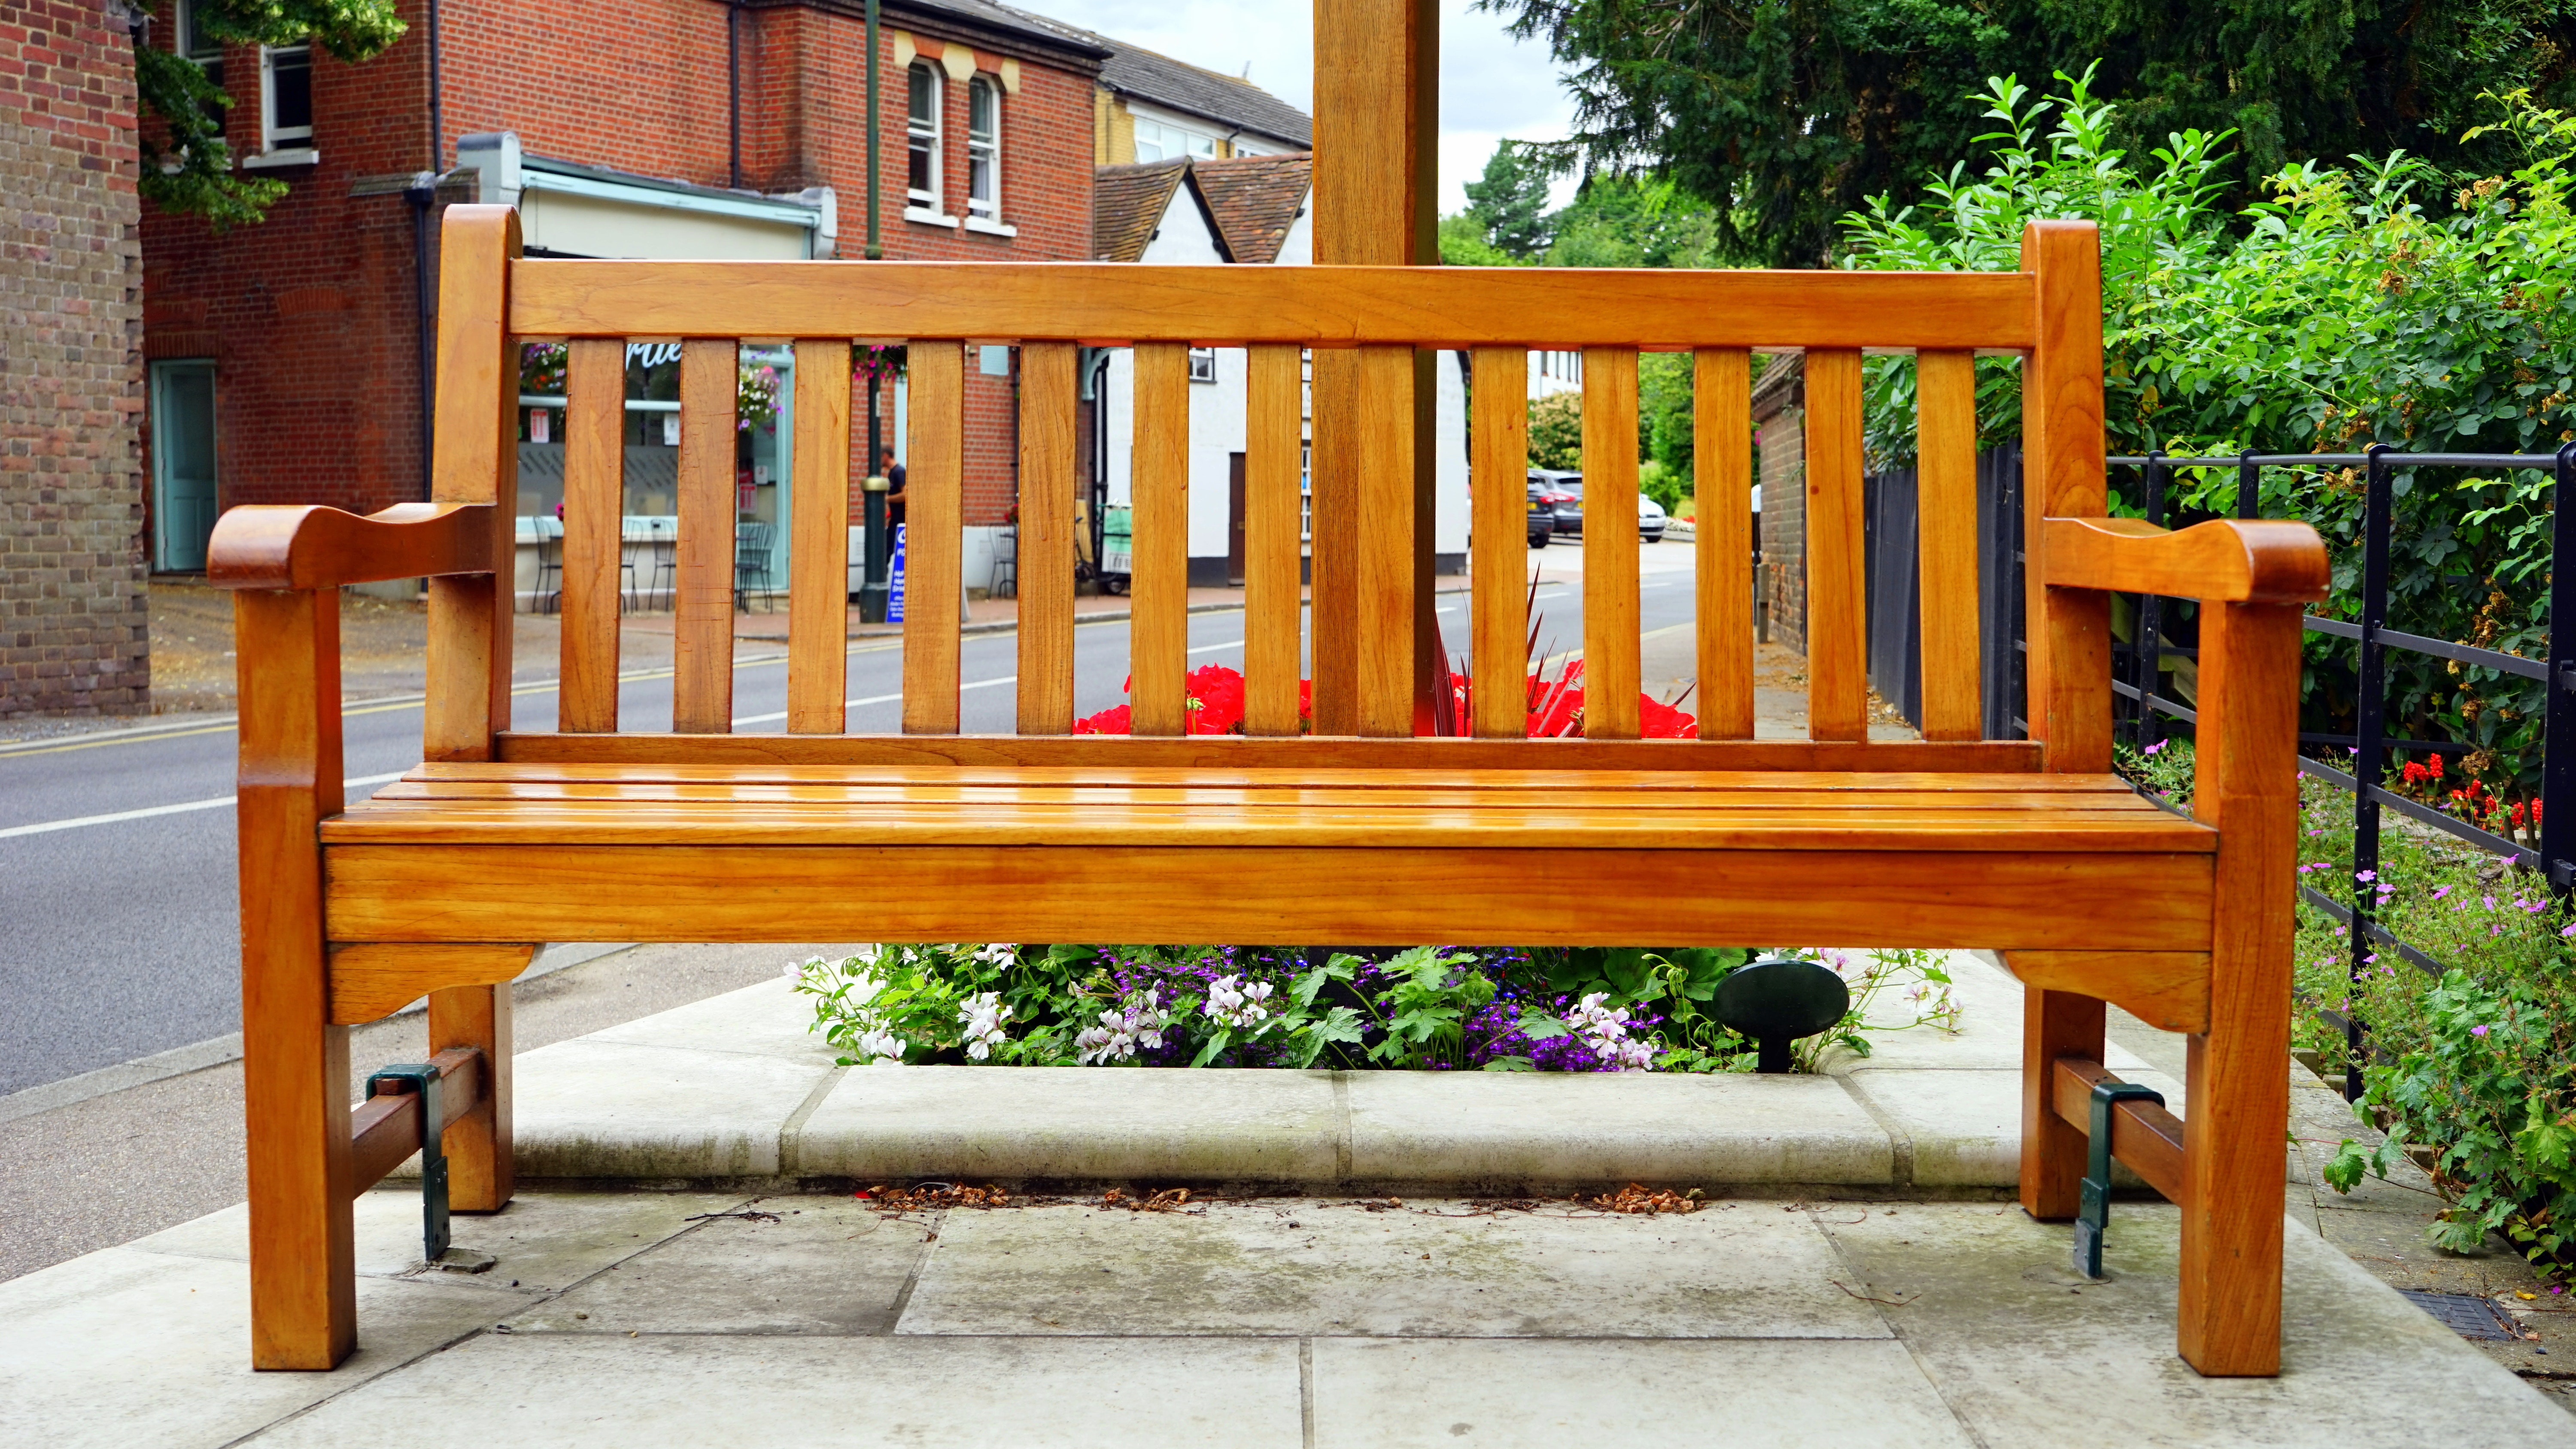 2. A Moment's Pause: Cultivating Reflection and Solace⁢ through Garden Bench Placement